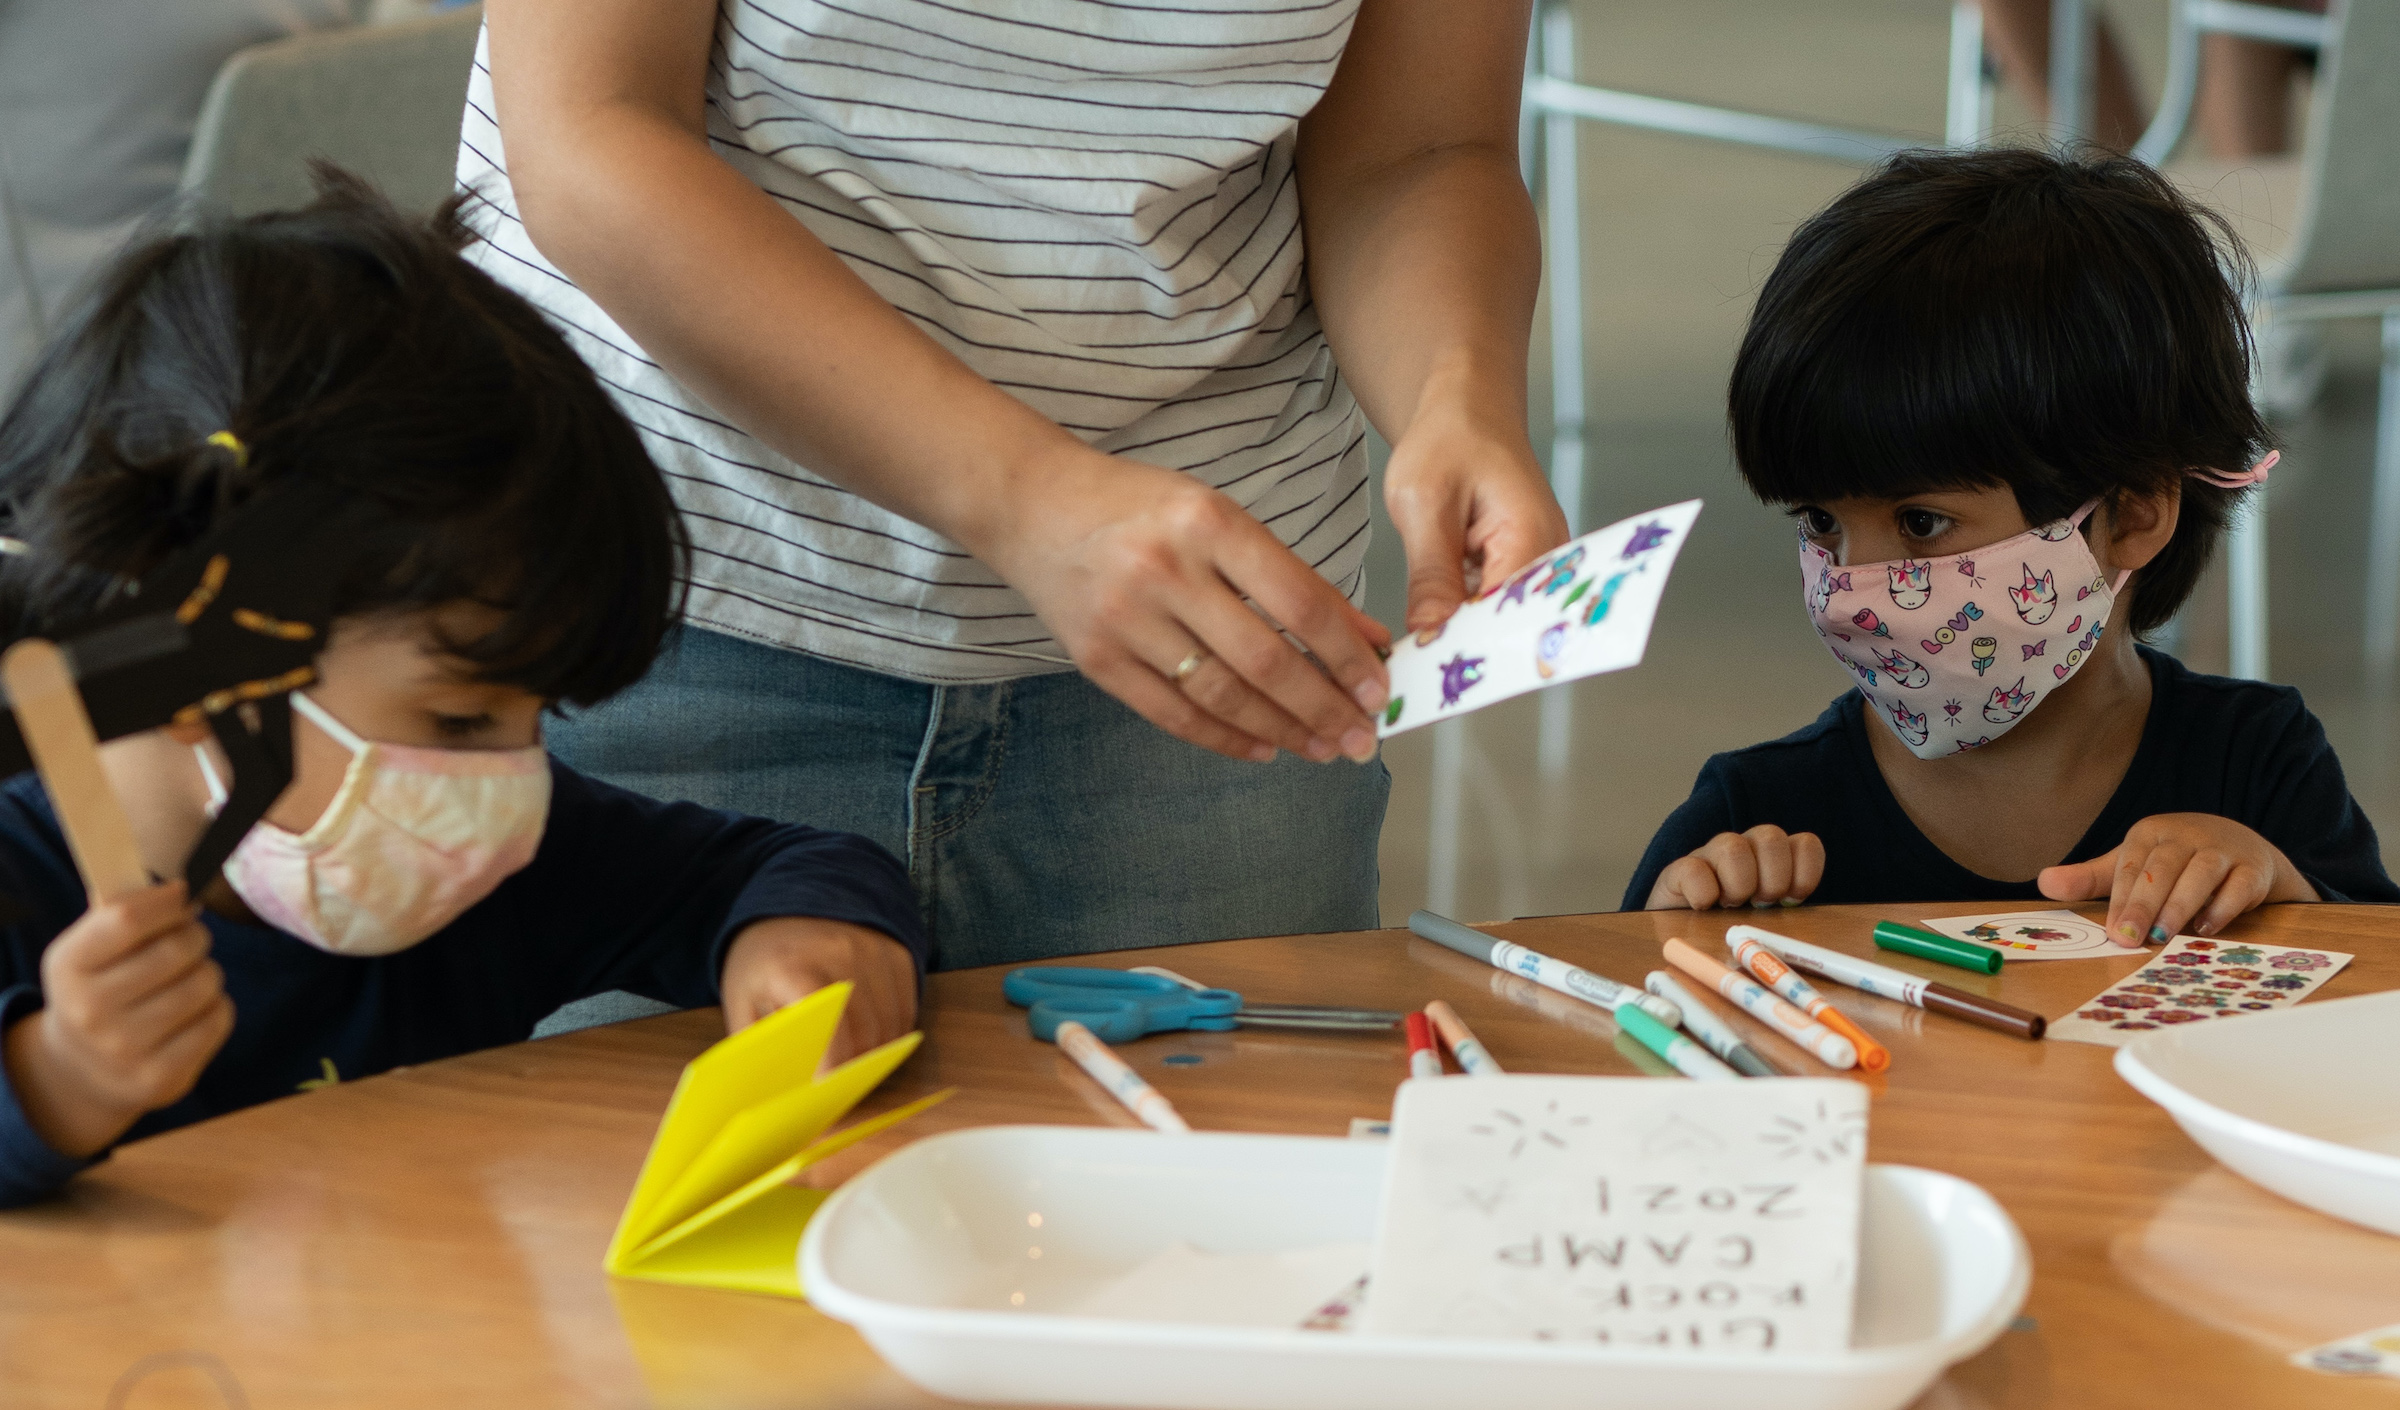 Two children sit at a table with a parent, making signs with various materials spread around them.